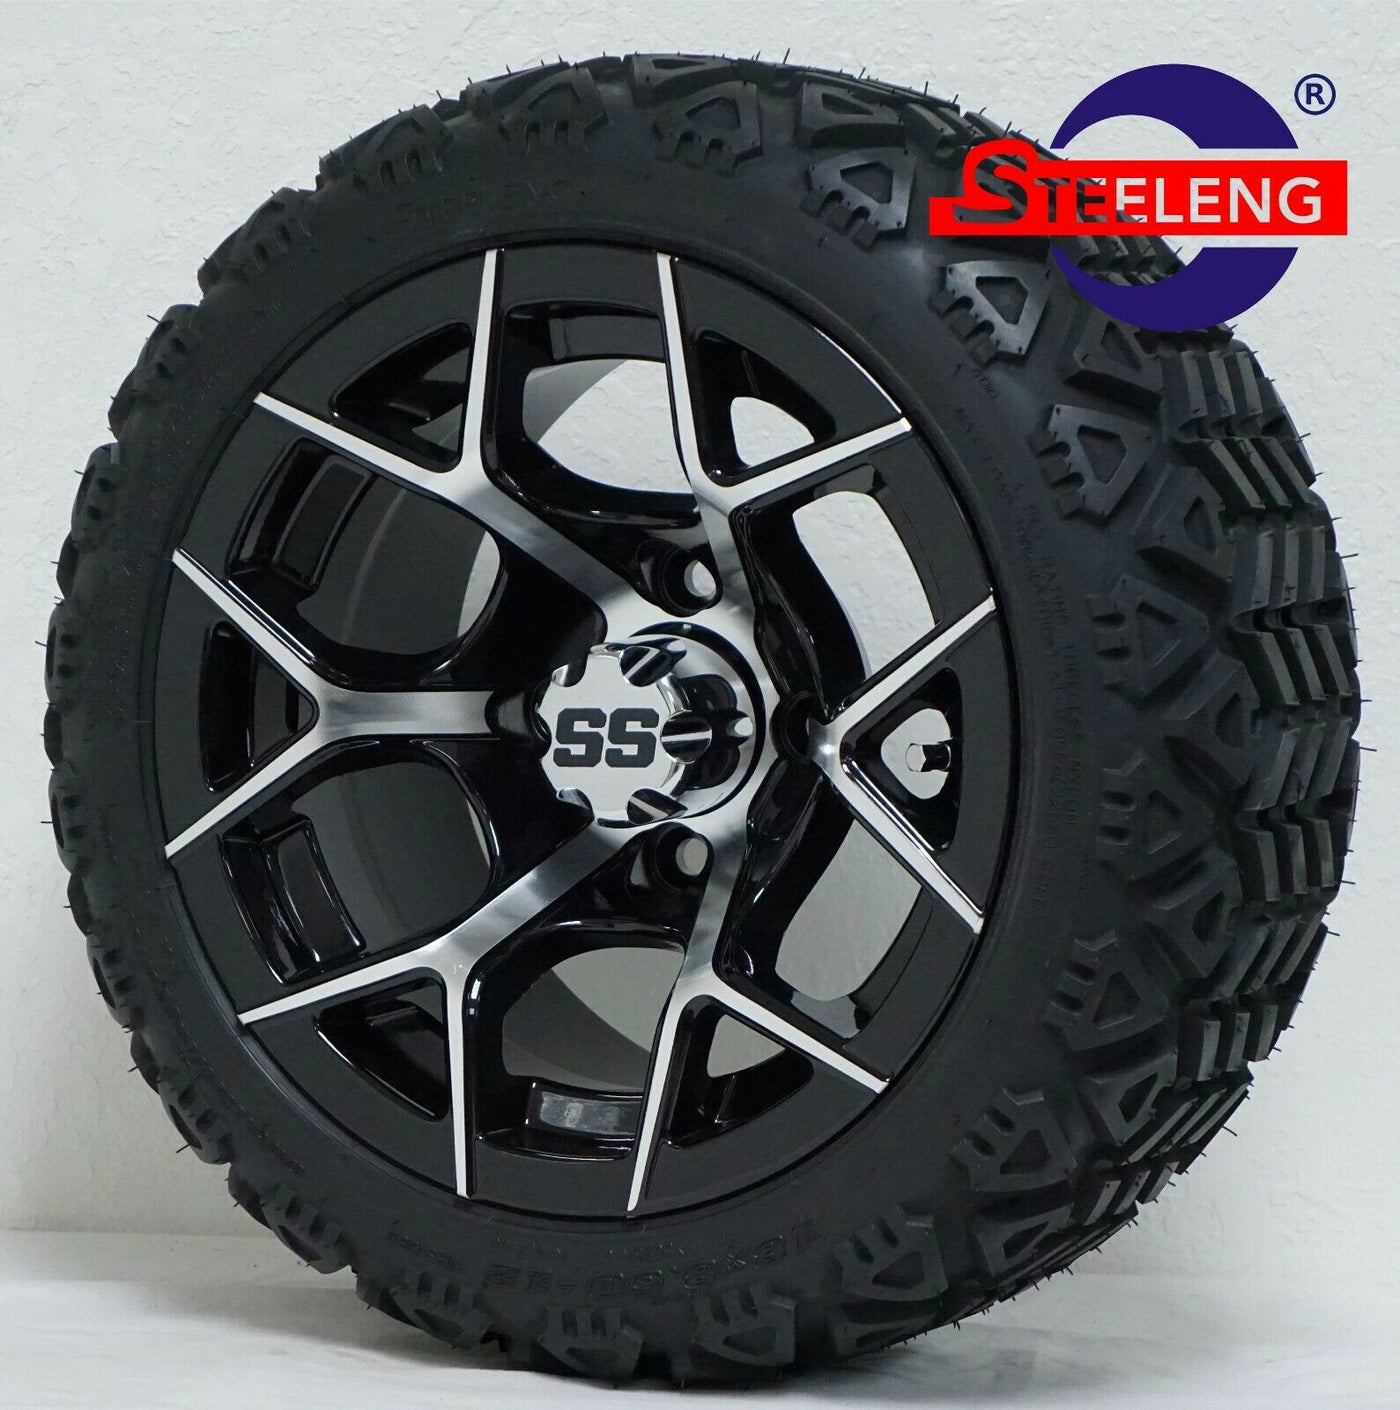 12" RALLY MACHINED / BLACK GOLF CART WHEELS and 12x7-18 ALL TERRAIN TIRES (SET OF 4) WITH LUGS